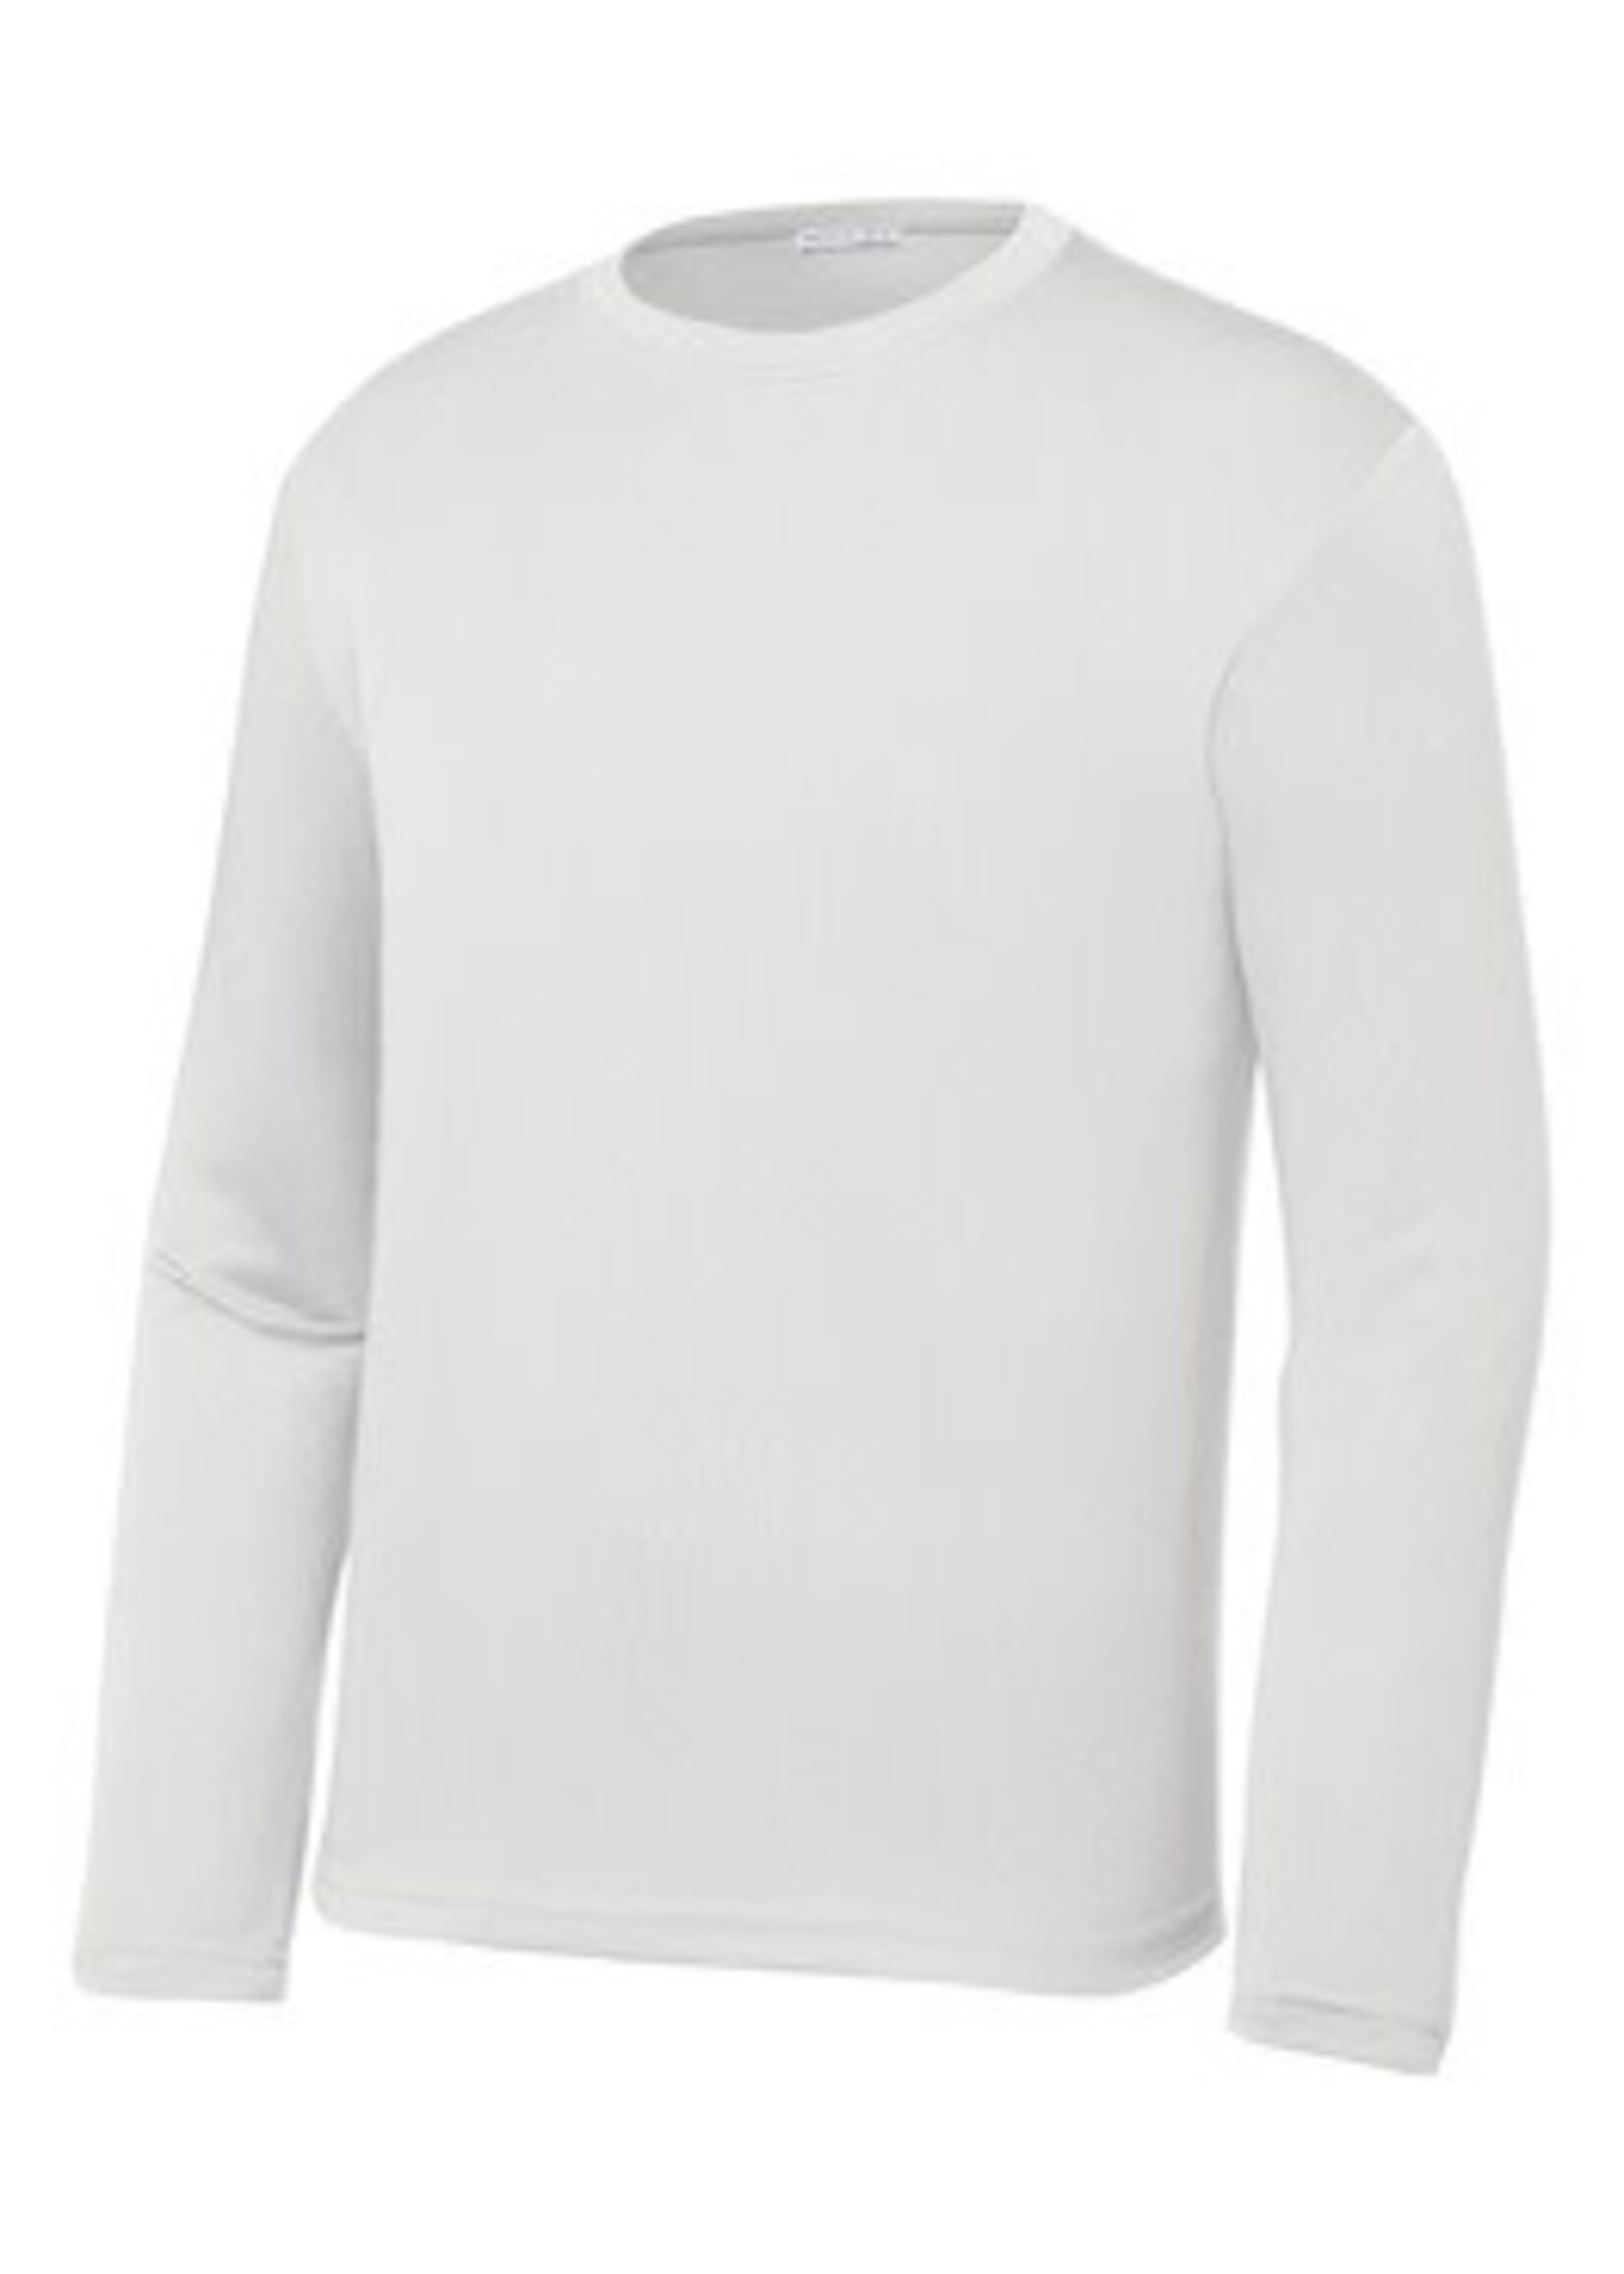 White Competitor LS Tee